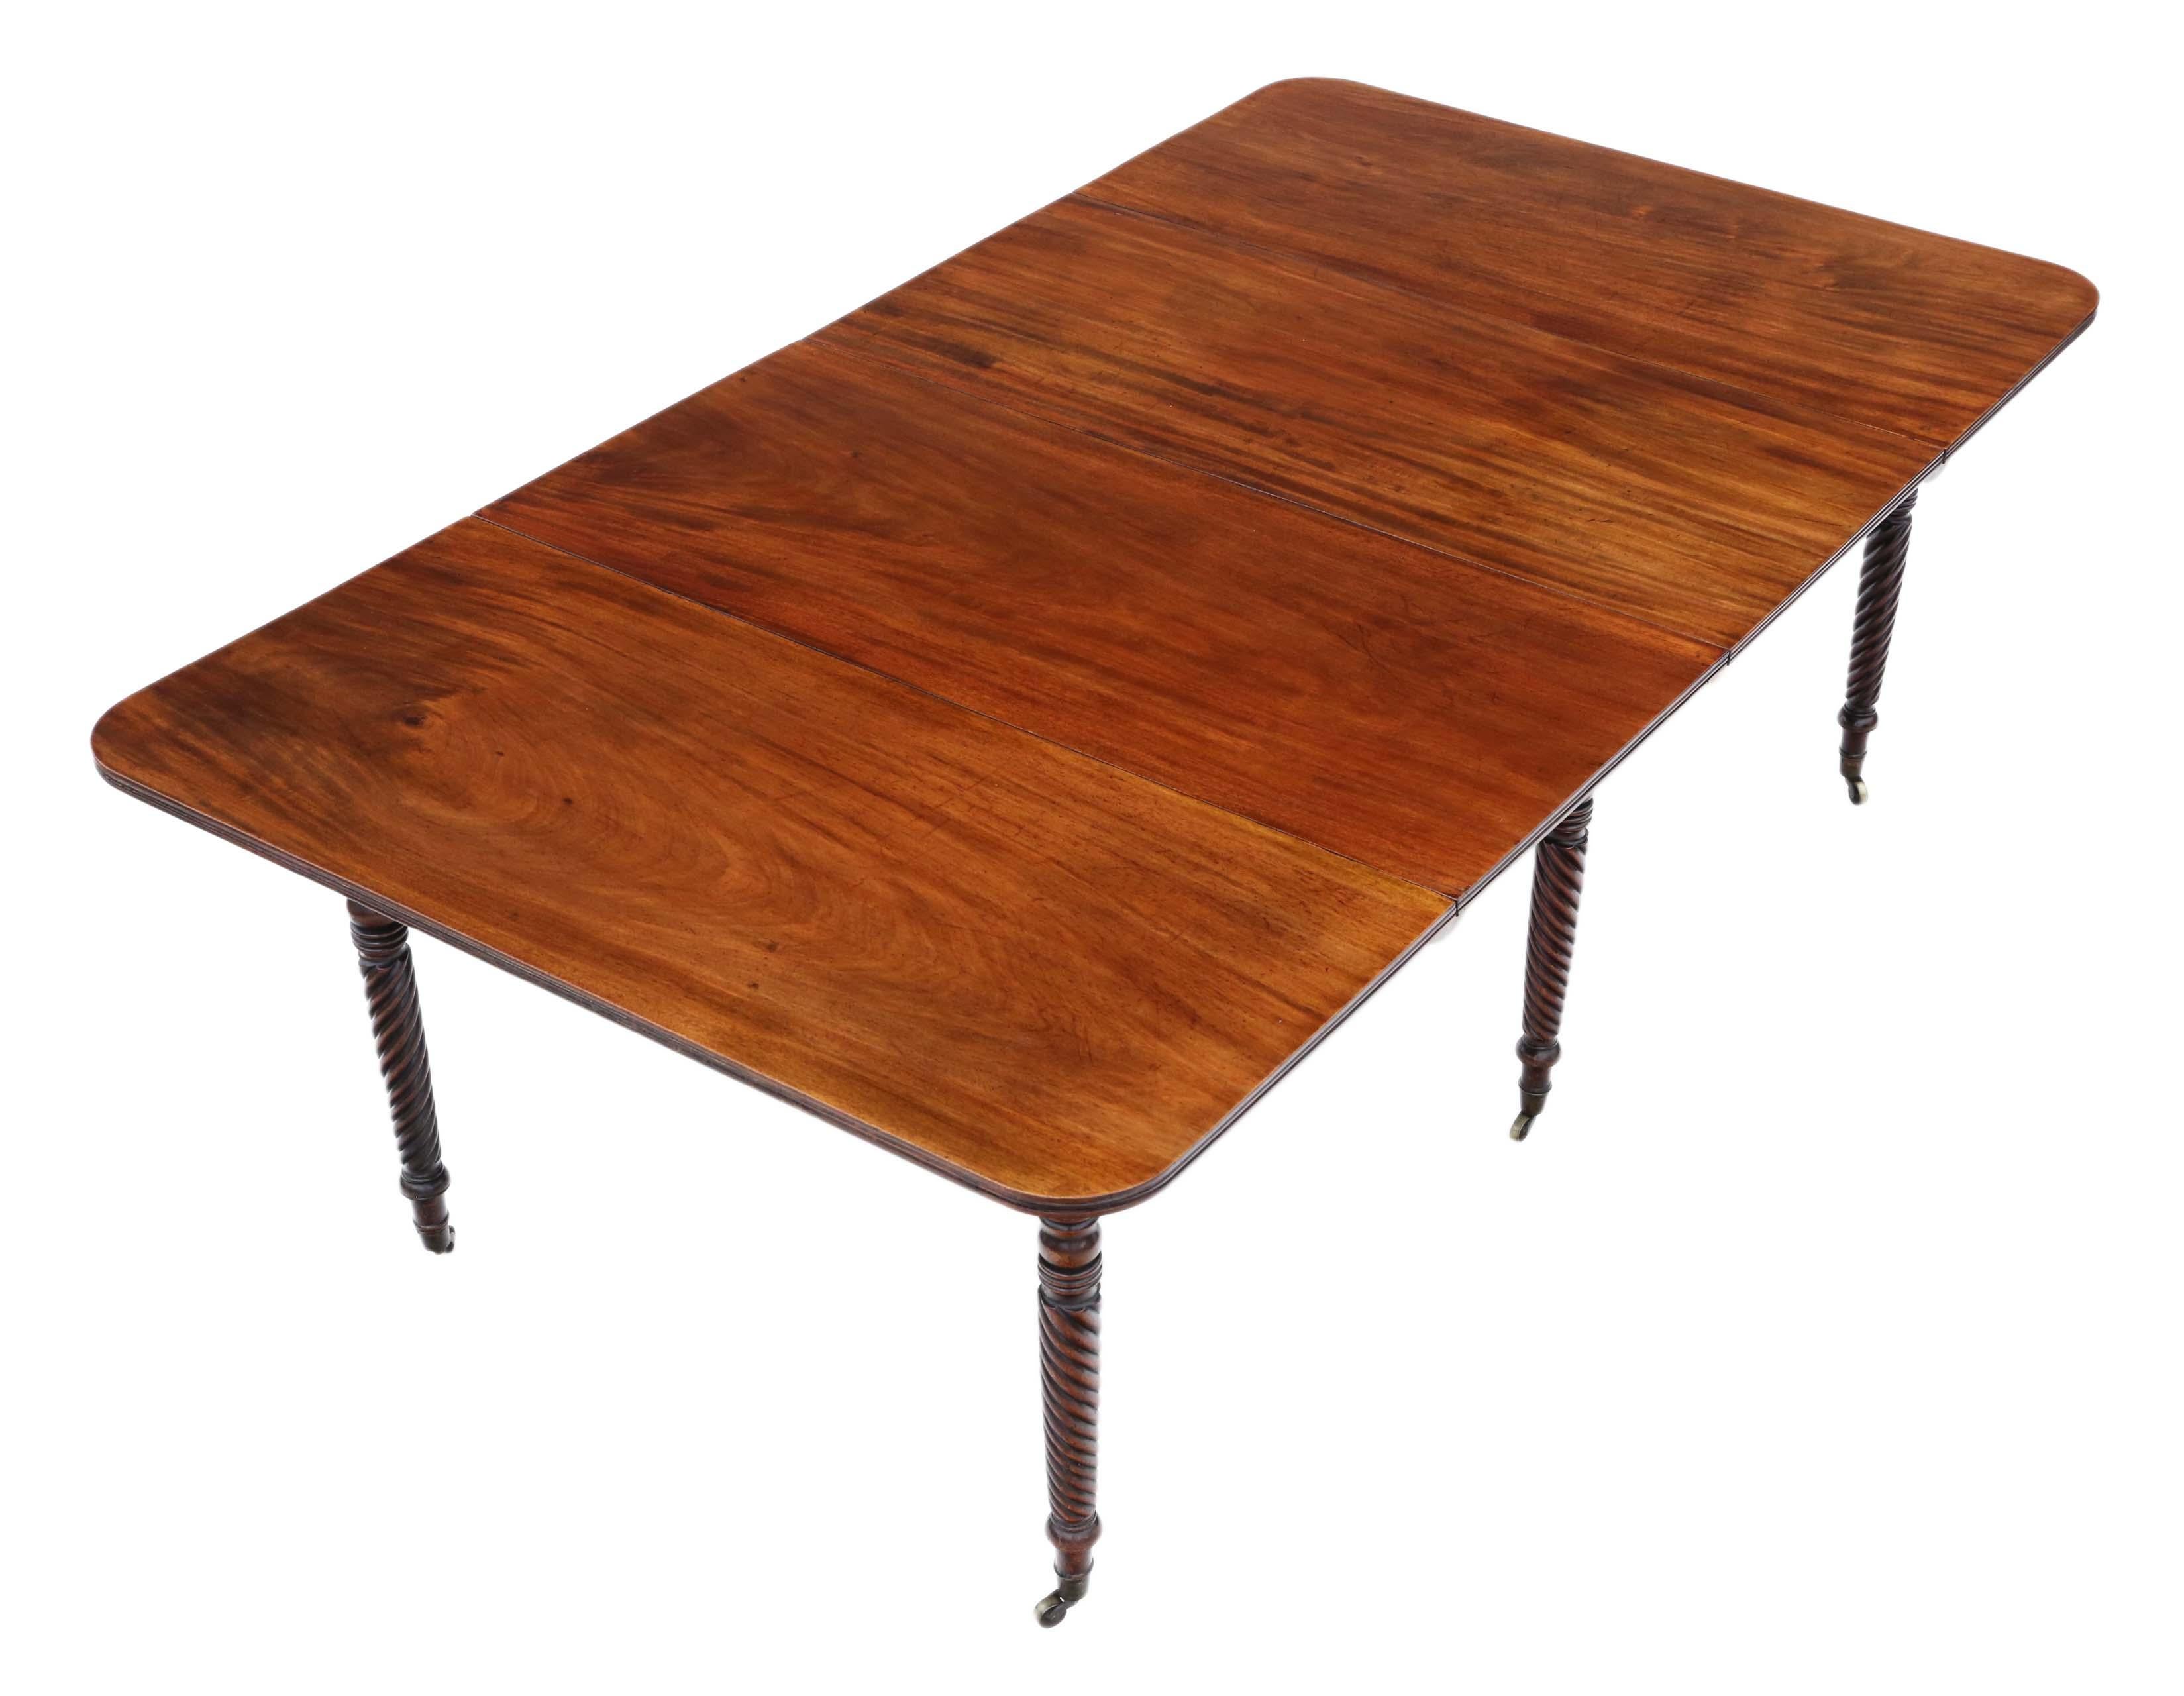 Antique large fine quality mahogany extending dining table 19th century C1825, in the manner of Gillows. Two removable leaves.

The table has a lovely sought after light, mellow colour, with slim breath-taking Trafalgar twist legs and stands on